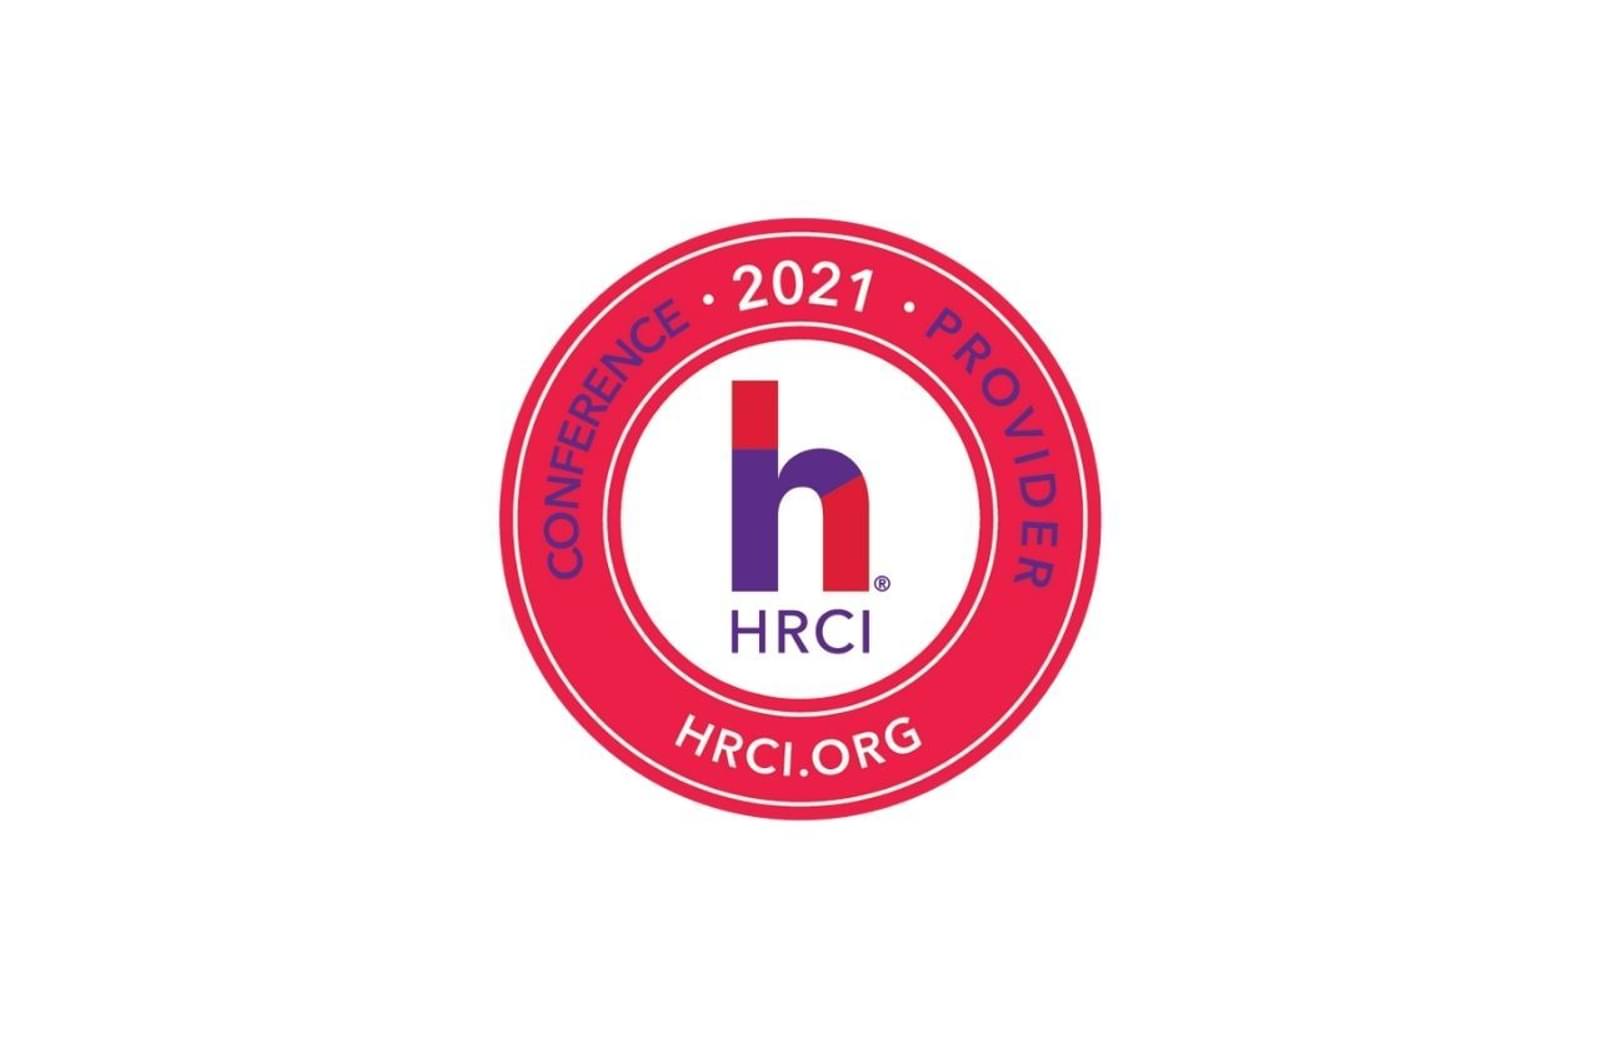 HRCI org Conference Provider 2021 Seal Thumbnail